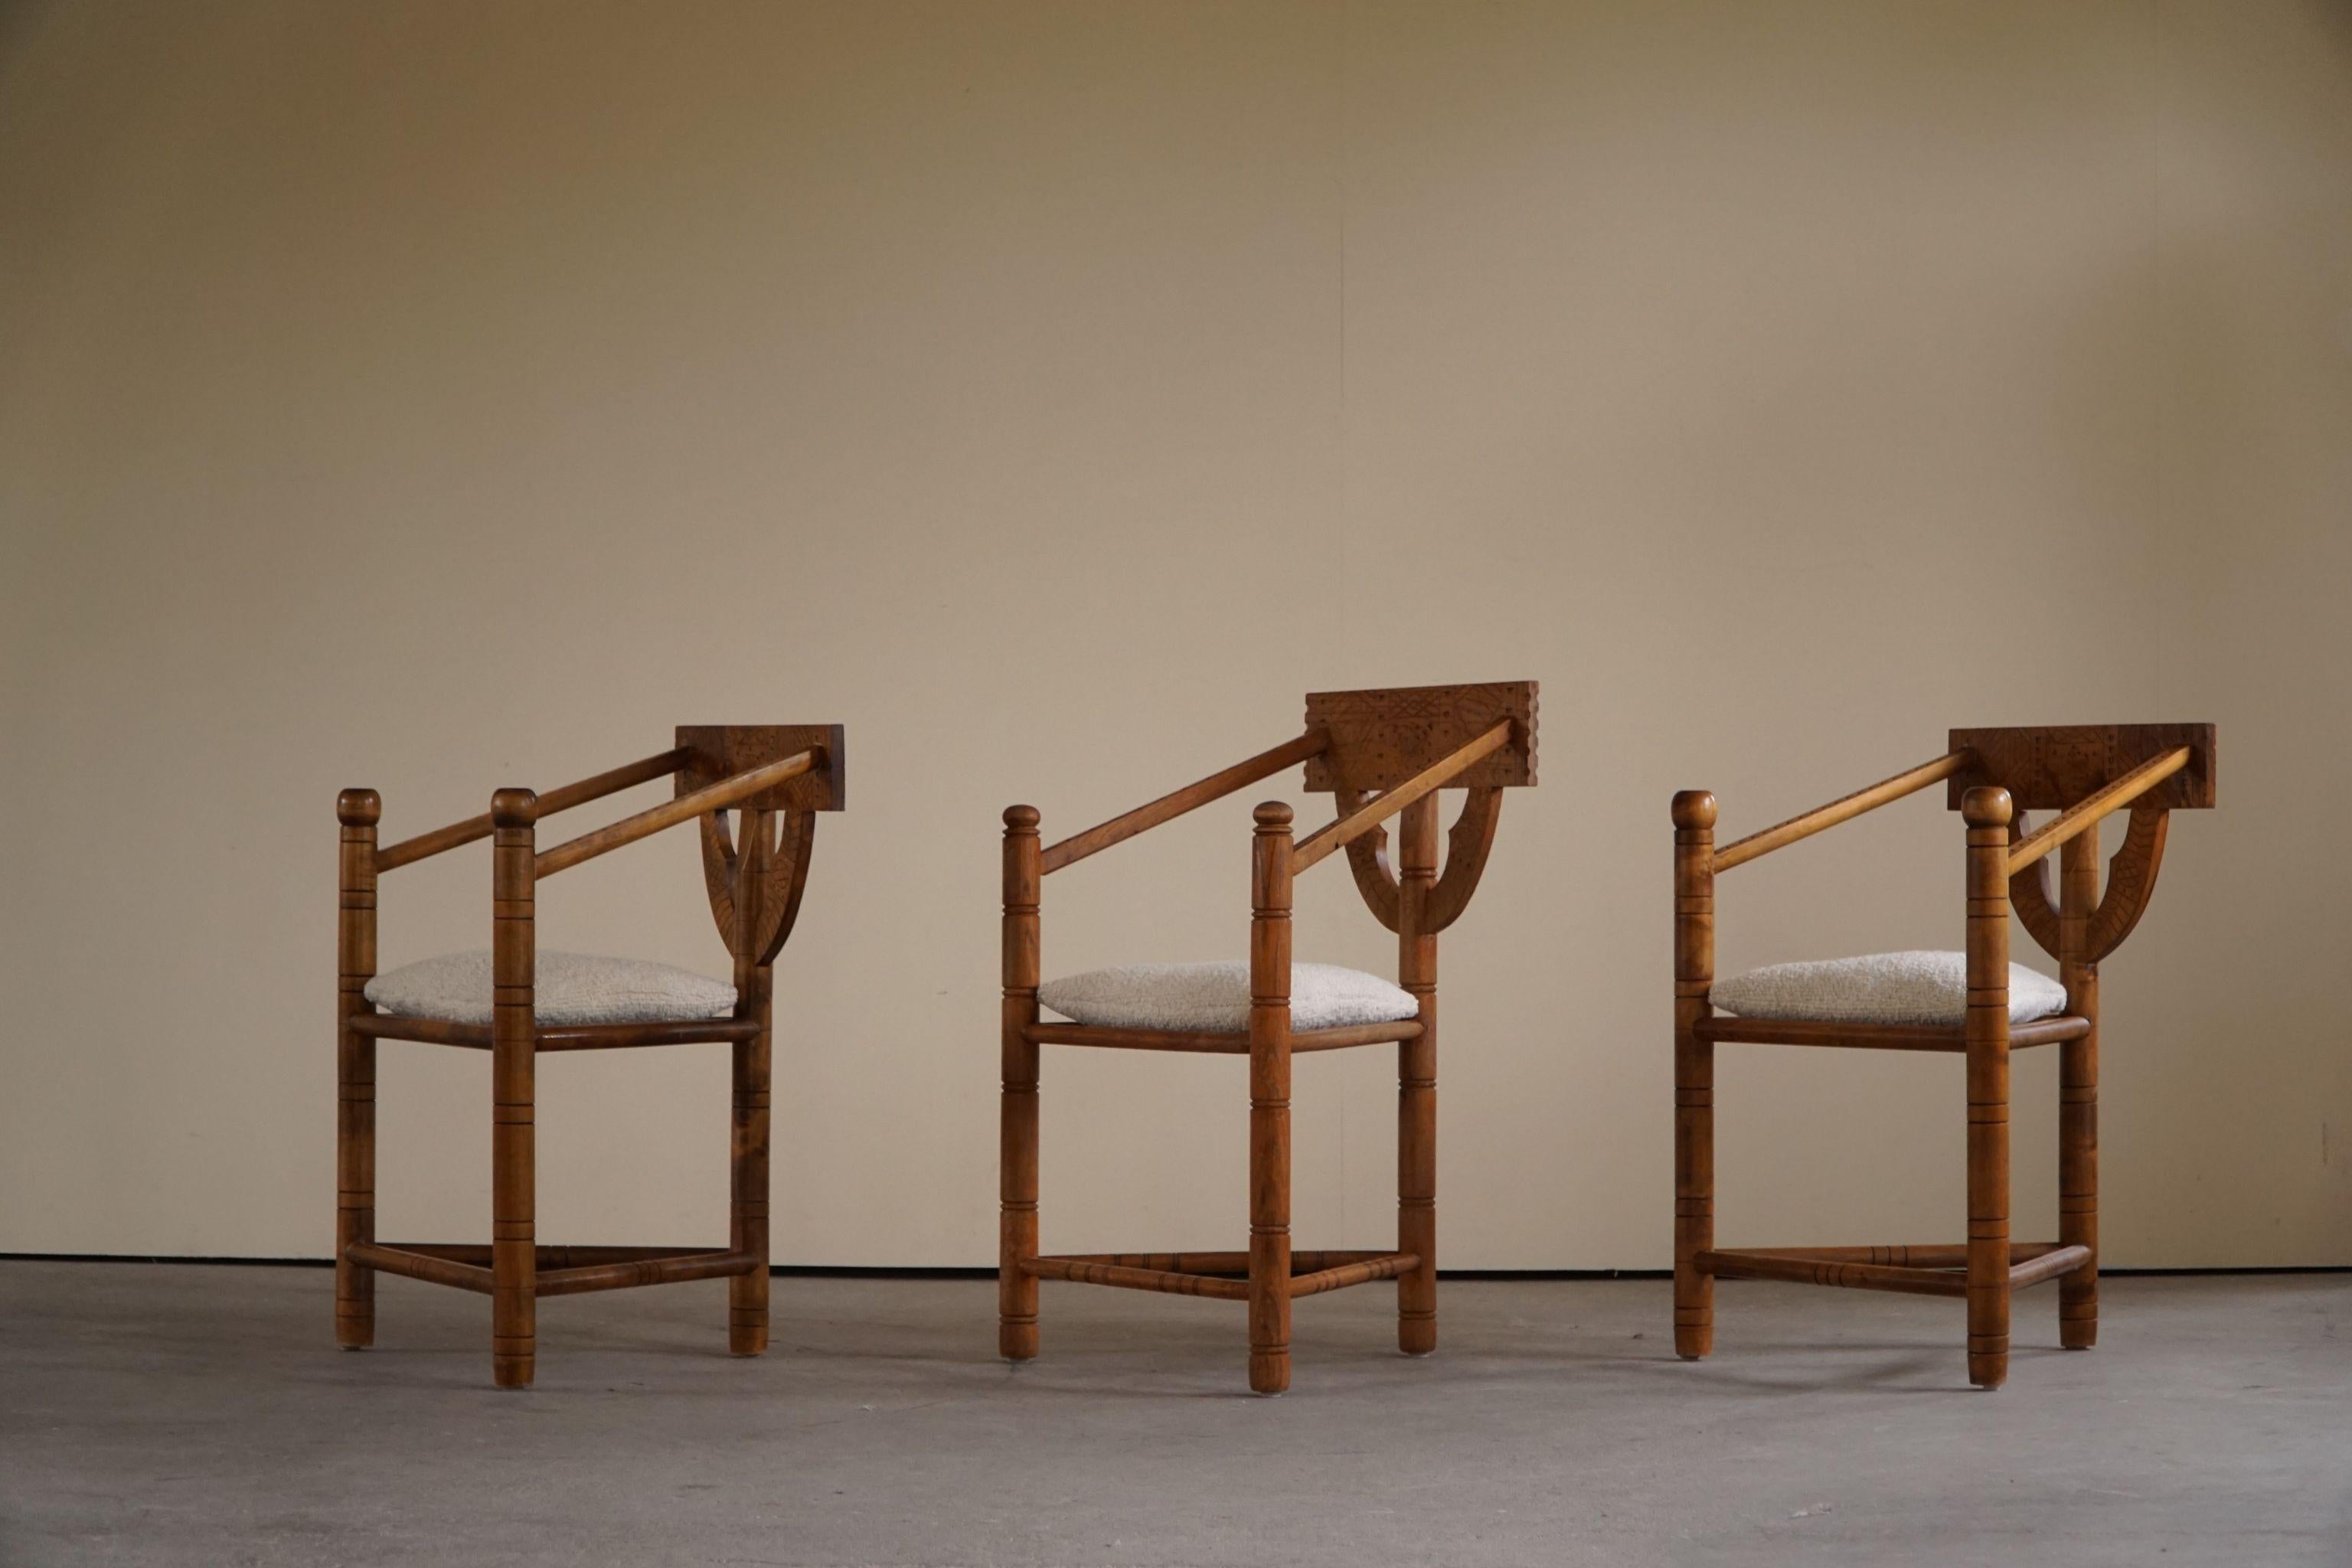 Set of 6 Swedish Monk Chairs with Bouclé Seats, Wabi Sabi, Early 20th Century For Sale 7